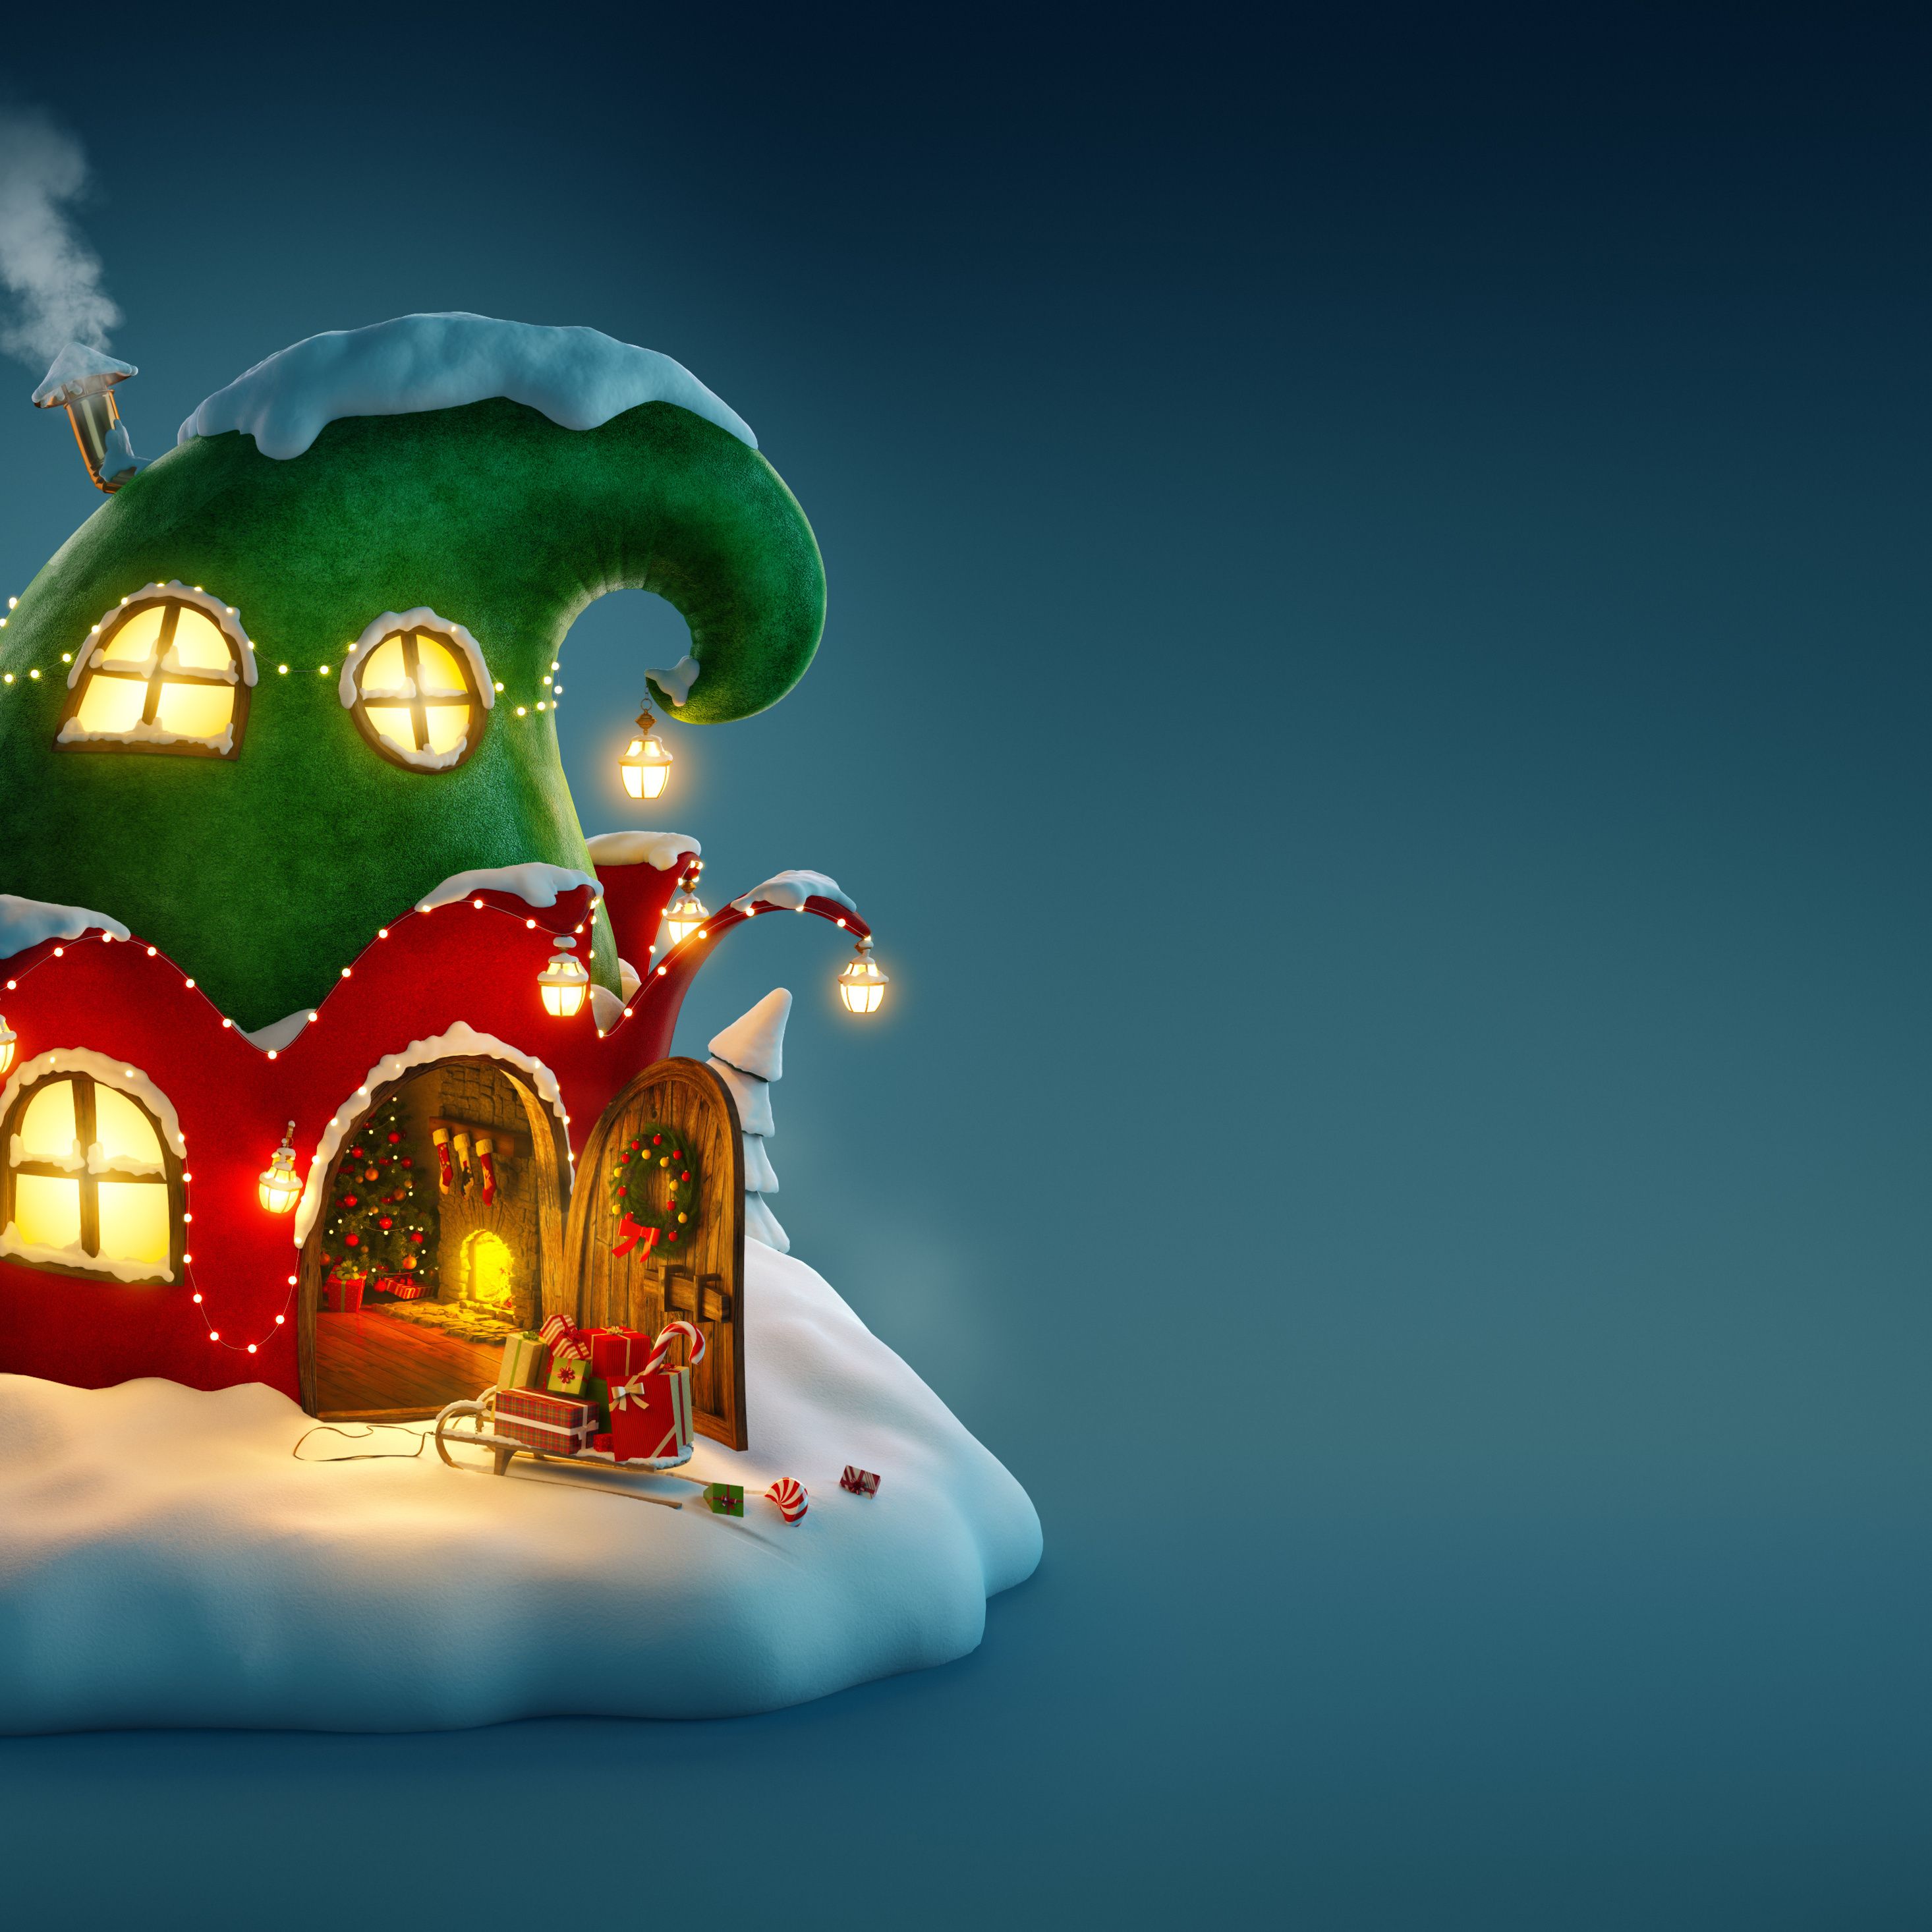 Christmas Fairy House 4k iPad Pro Retina Display HD 4k Wallpaper, Image, Background, Photo and Picture